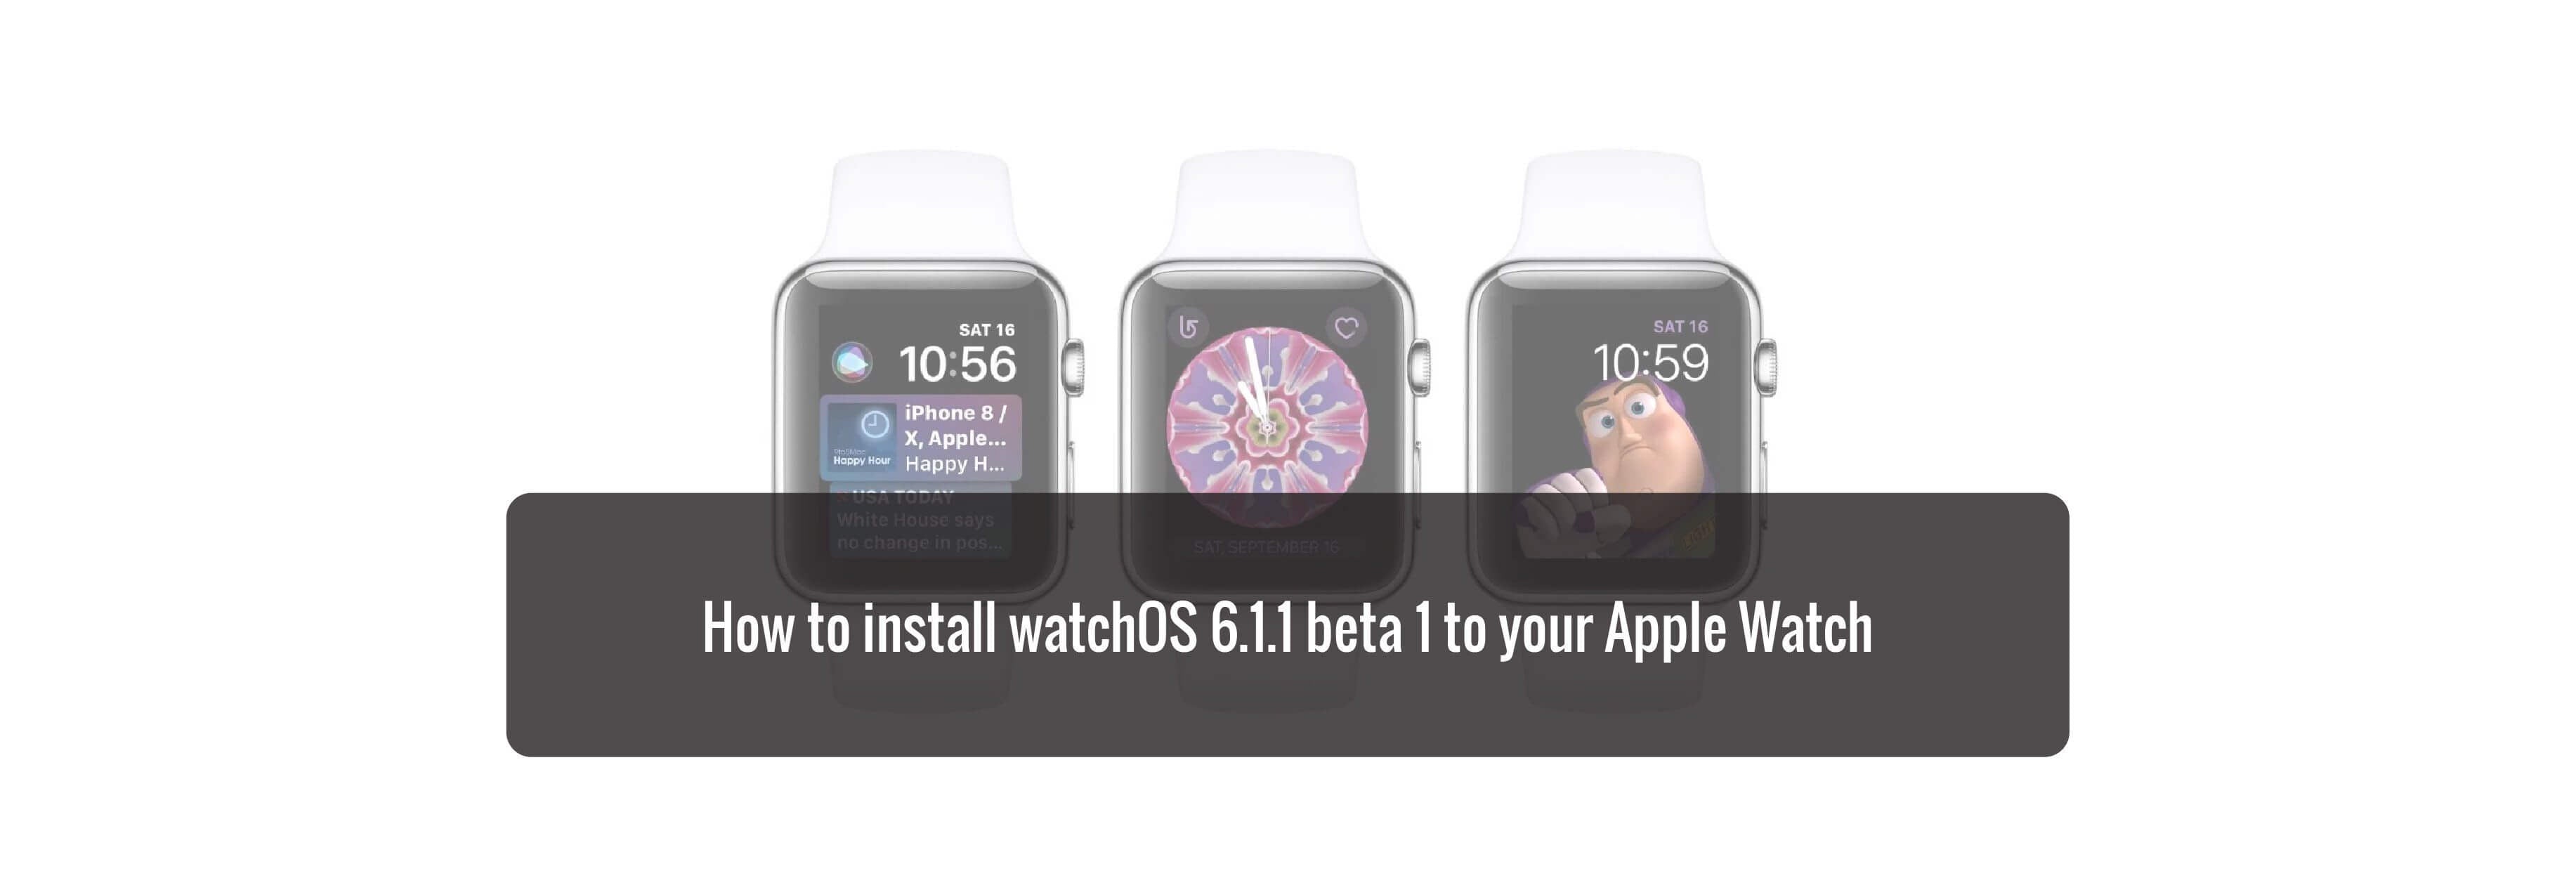 How to install watchOS 6.1.1 beta 1 to your Apple Watch